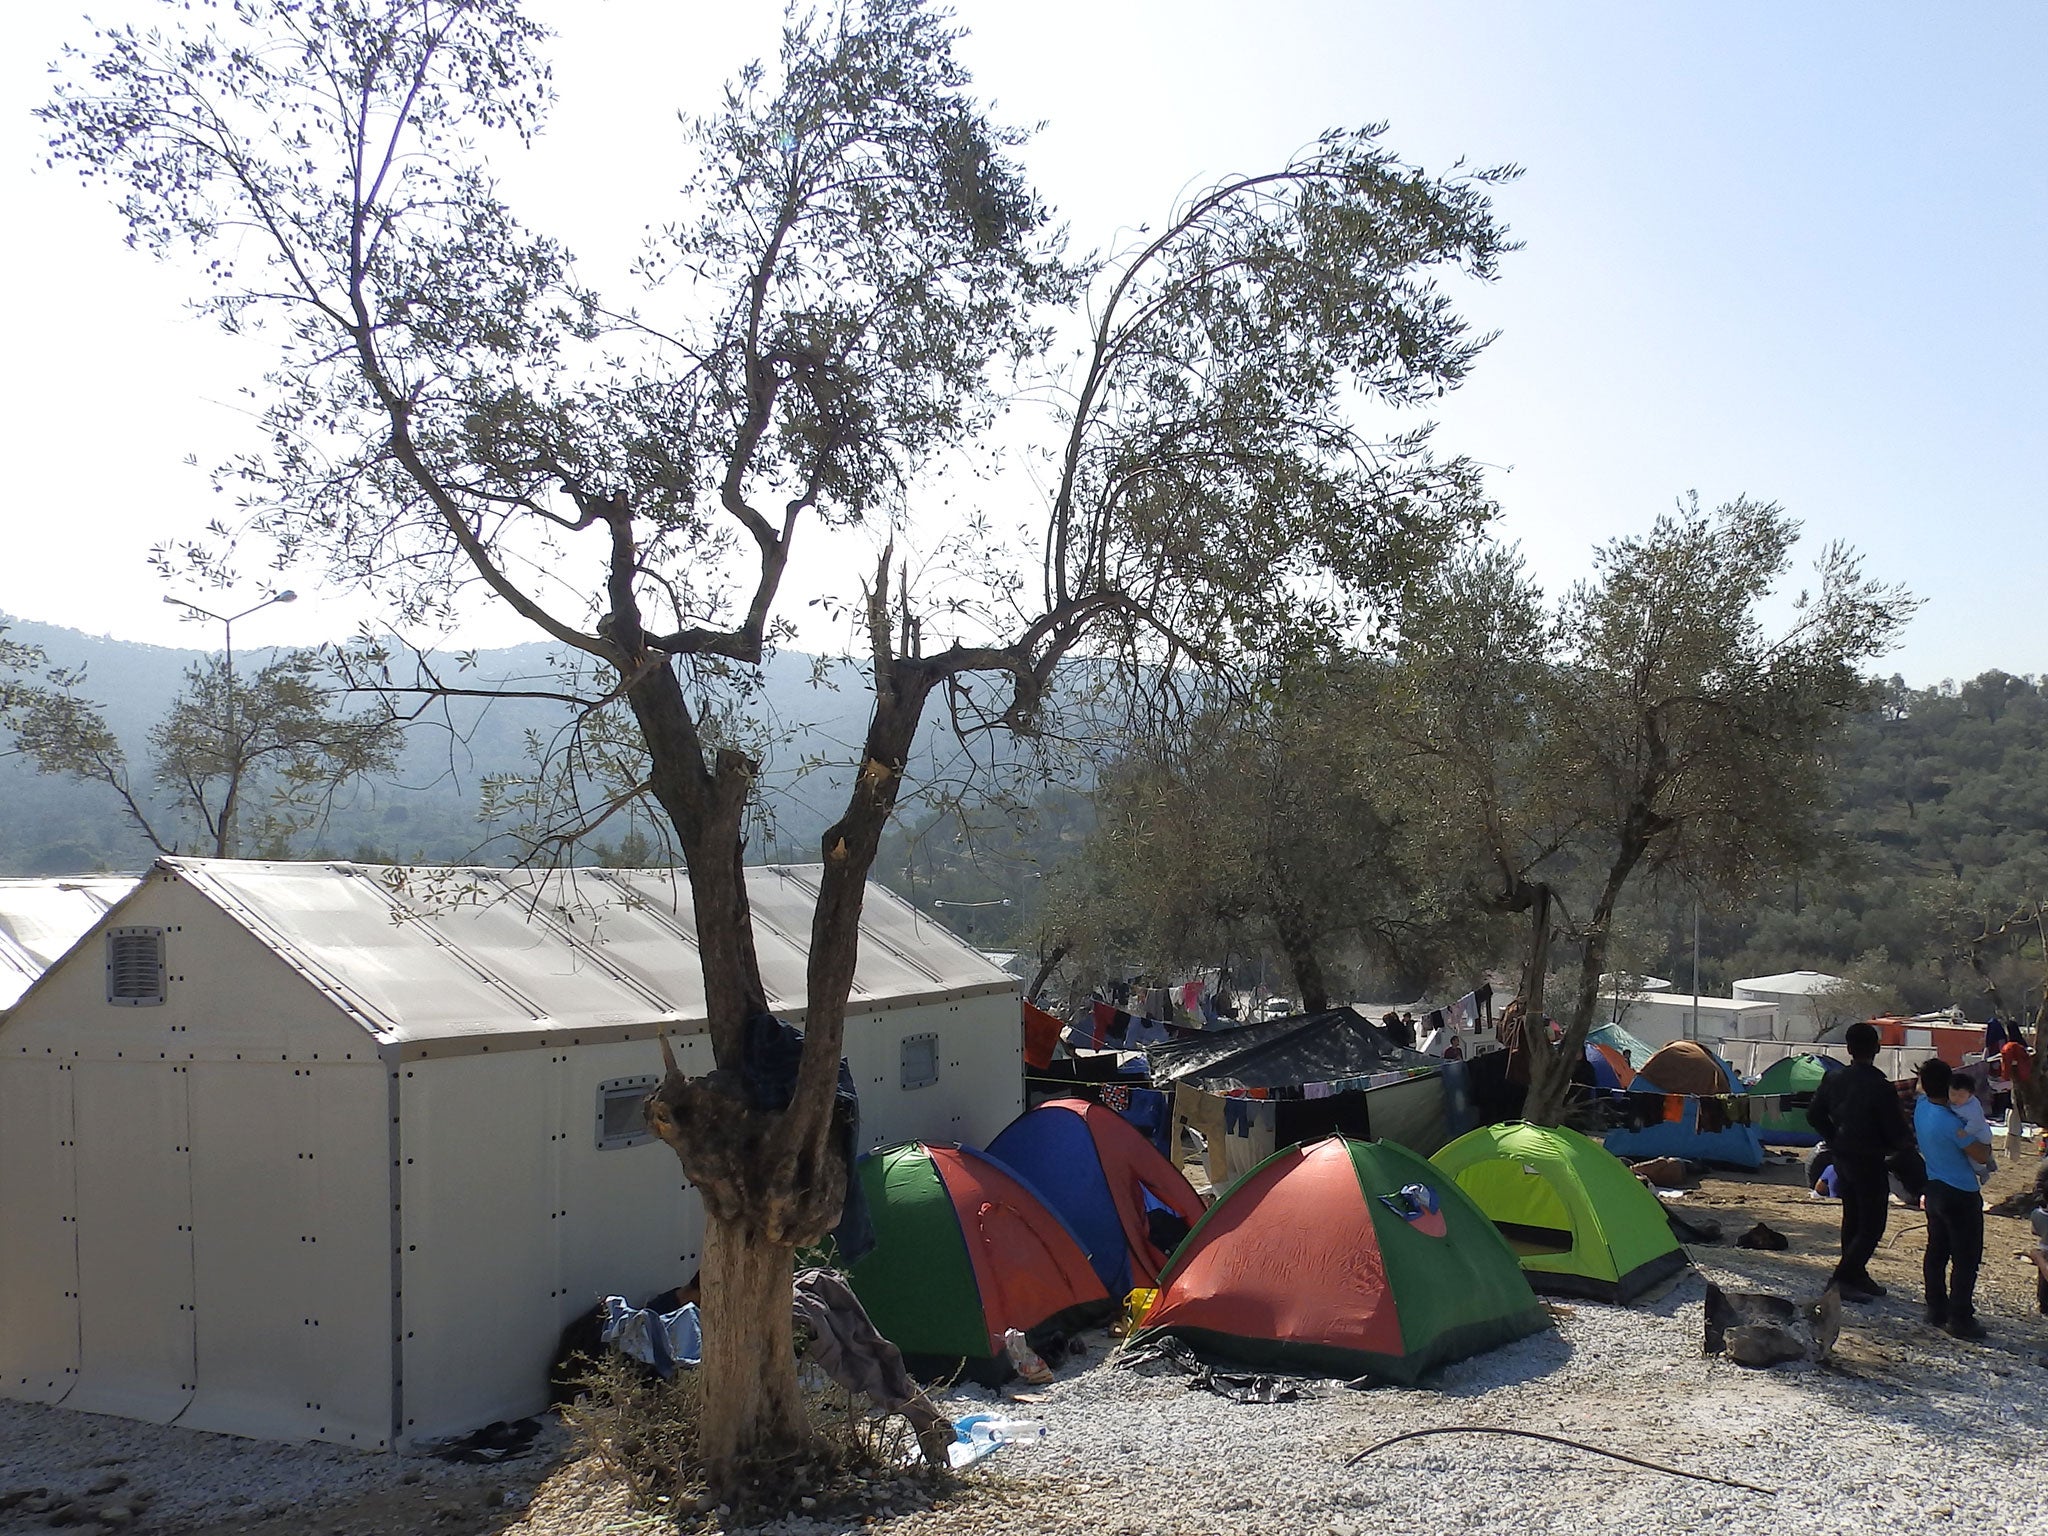 Ikea refugee shelters next to makeshift tents at the Moria refugee camp in Lesbos, Greece, in November 2015